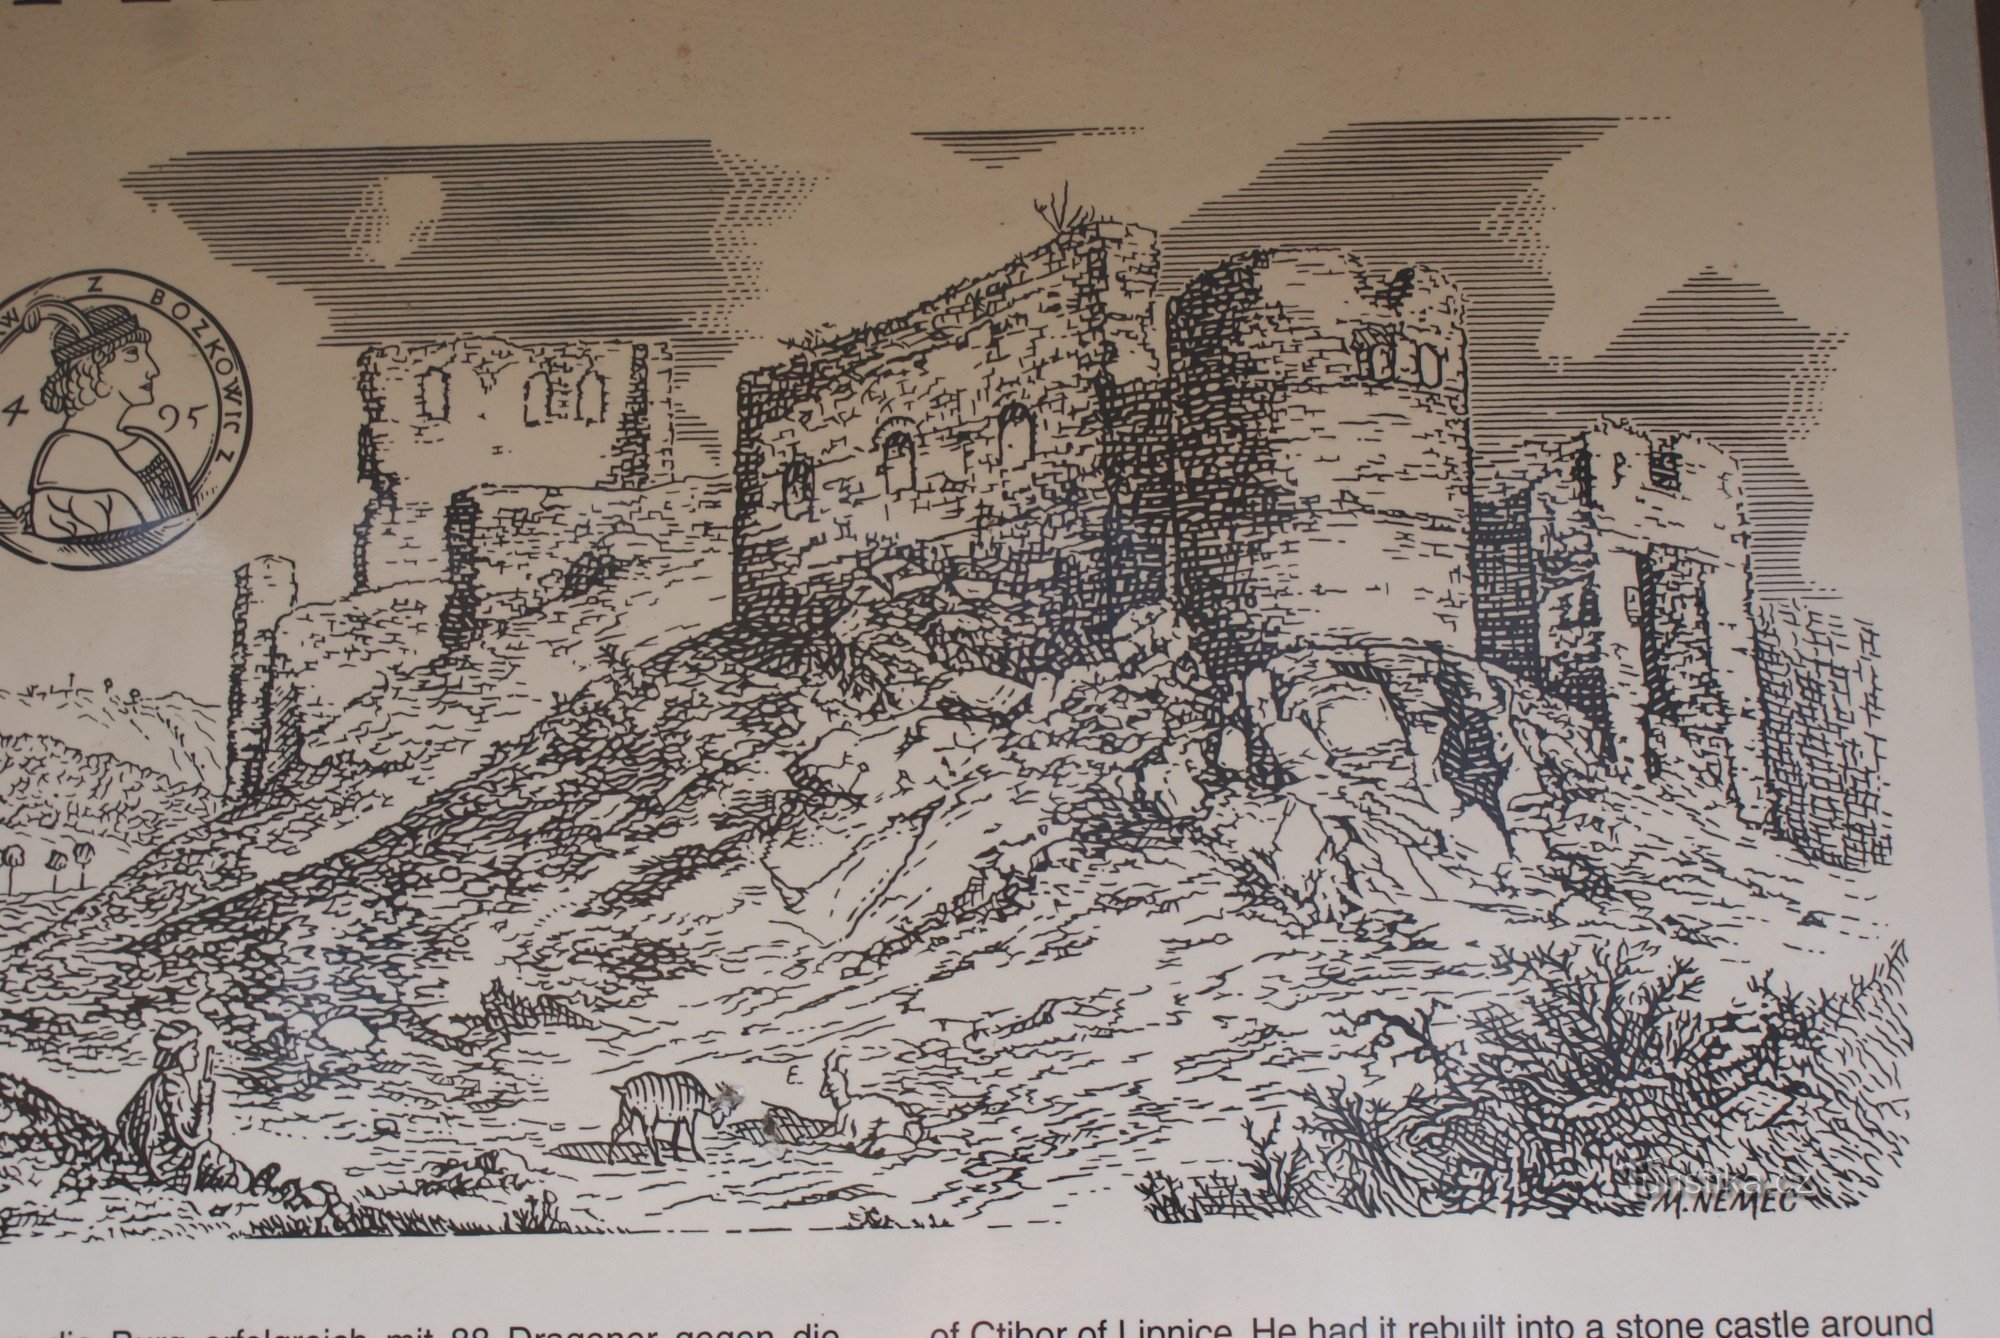 the appearance of the castle in the 19th century